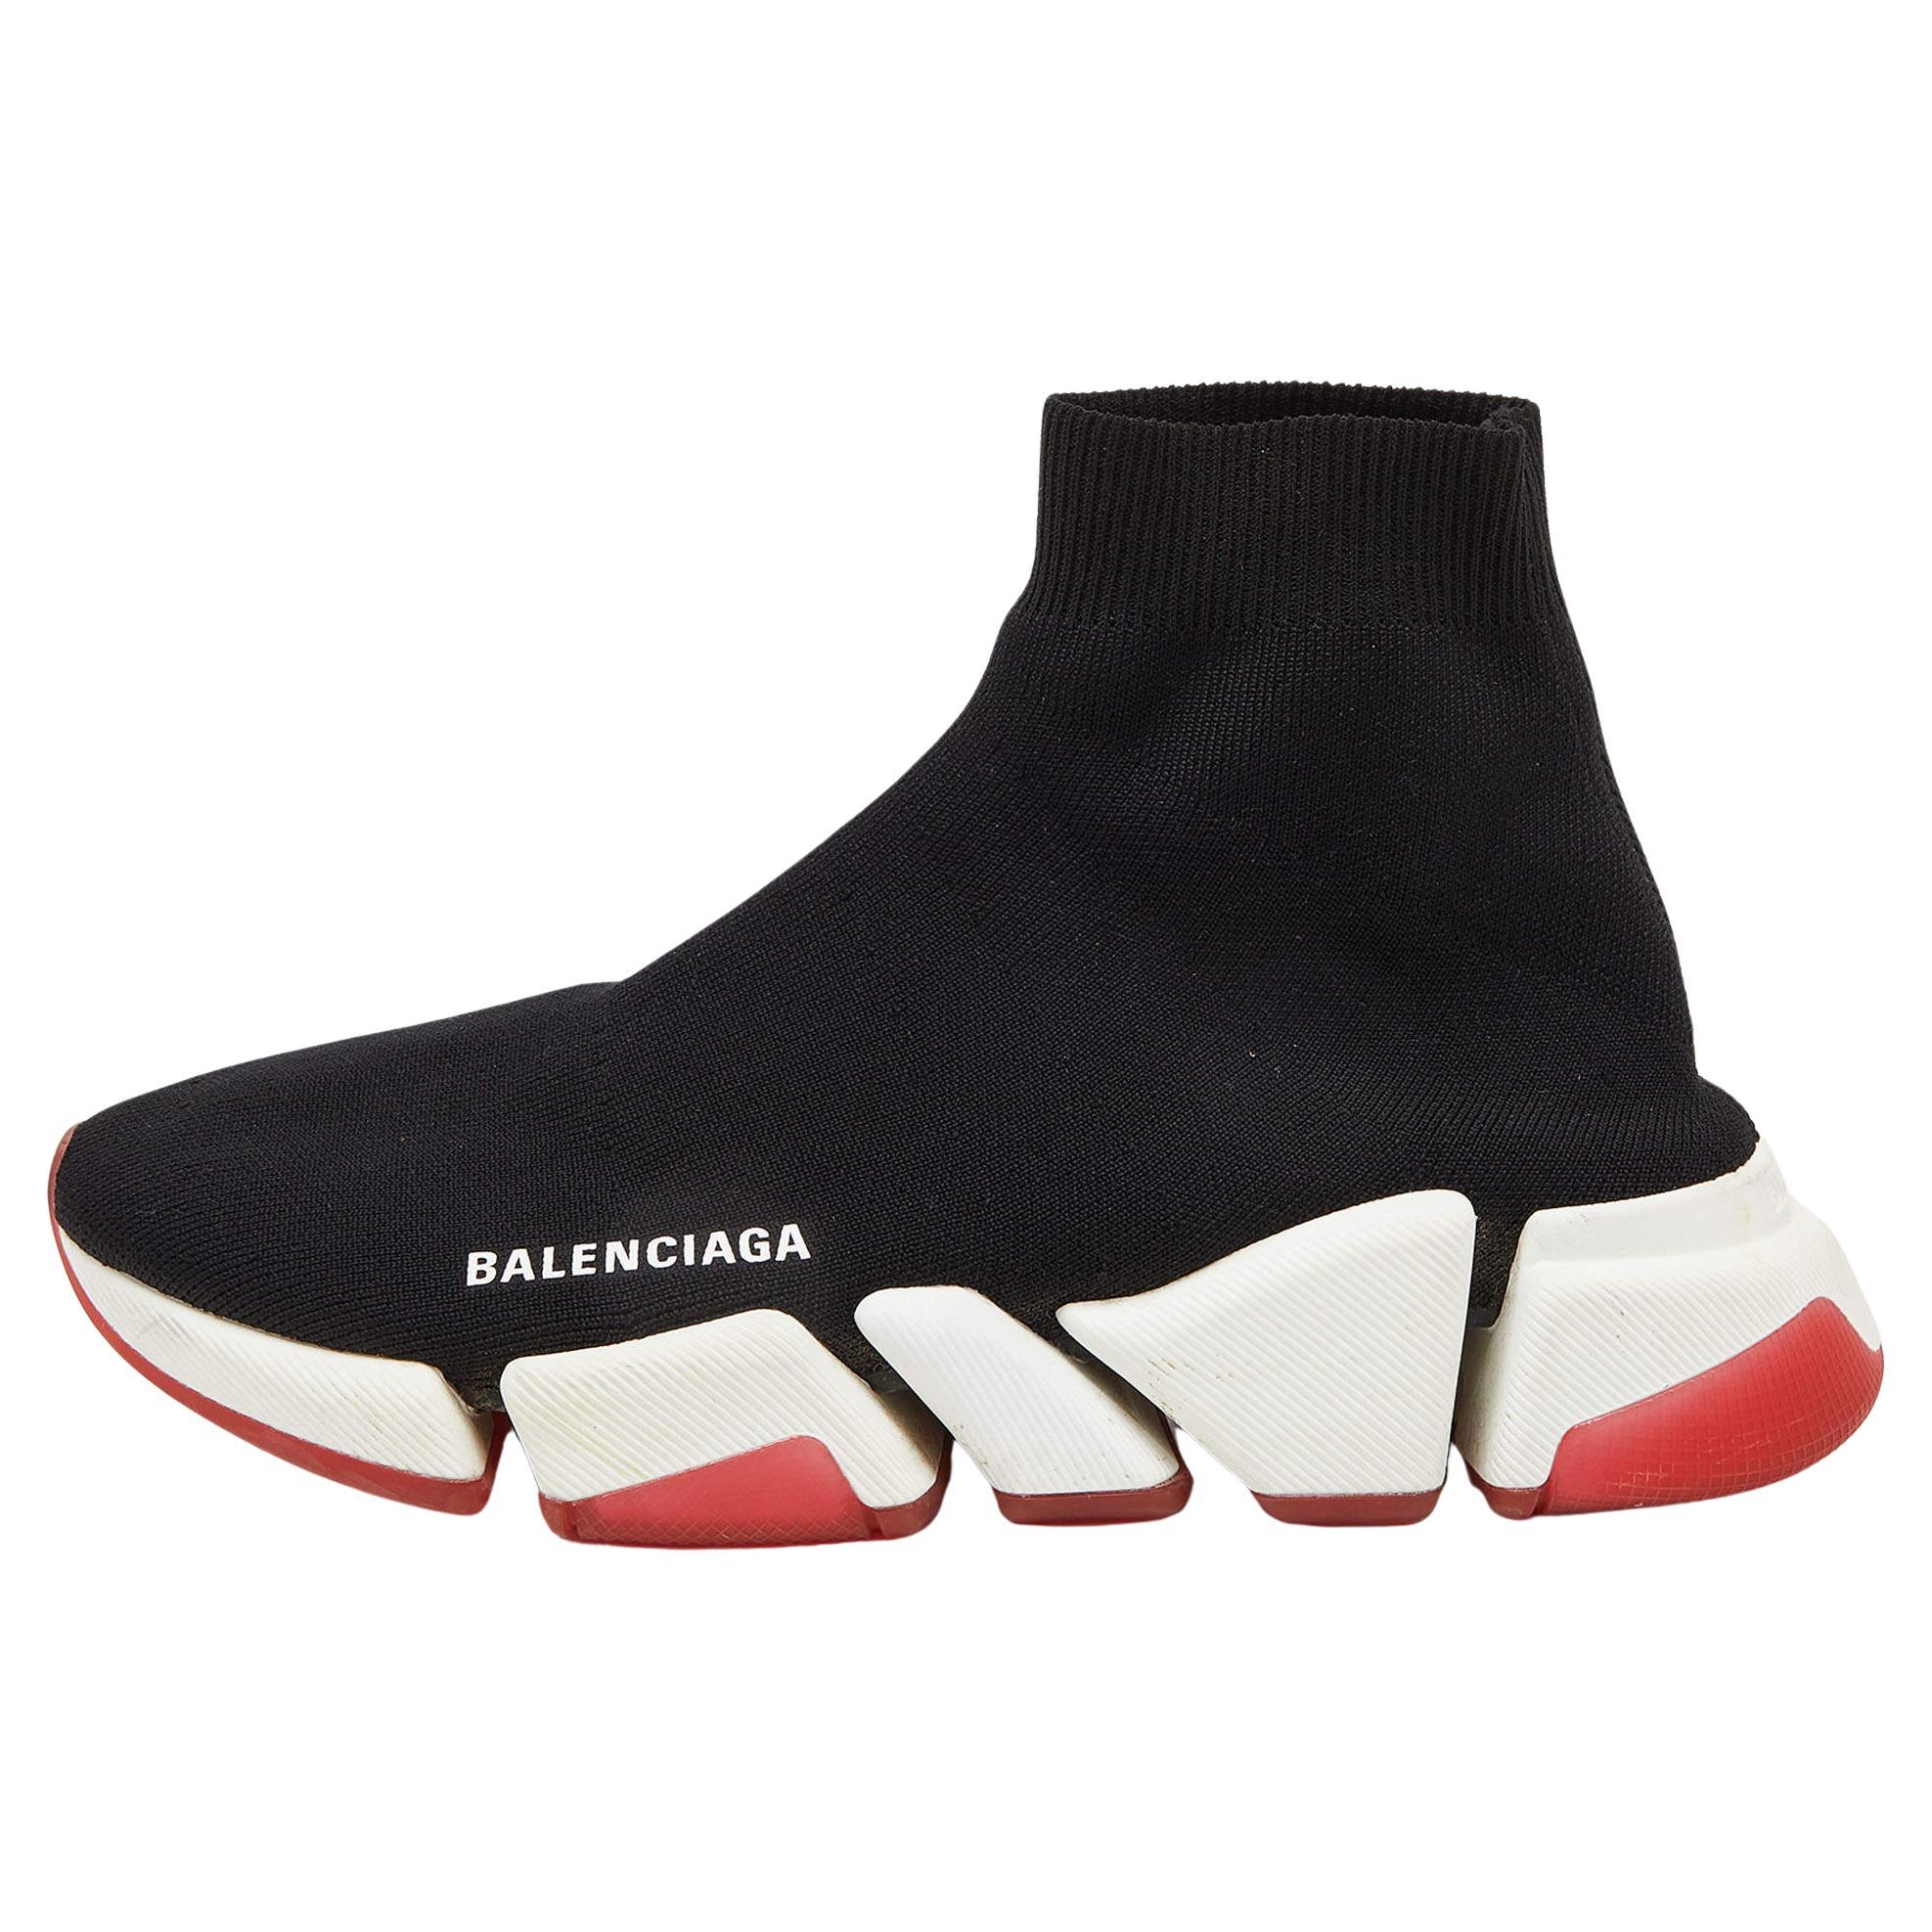 Balenciaga Black Knit Fabric Speed Trainer Sneakers Size 38 For Sale